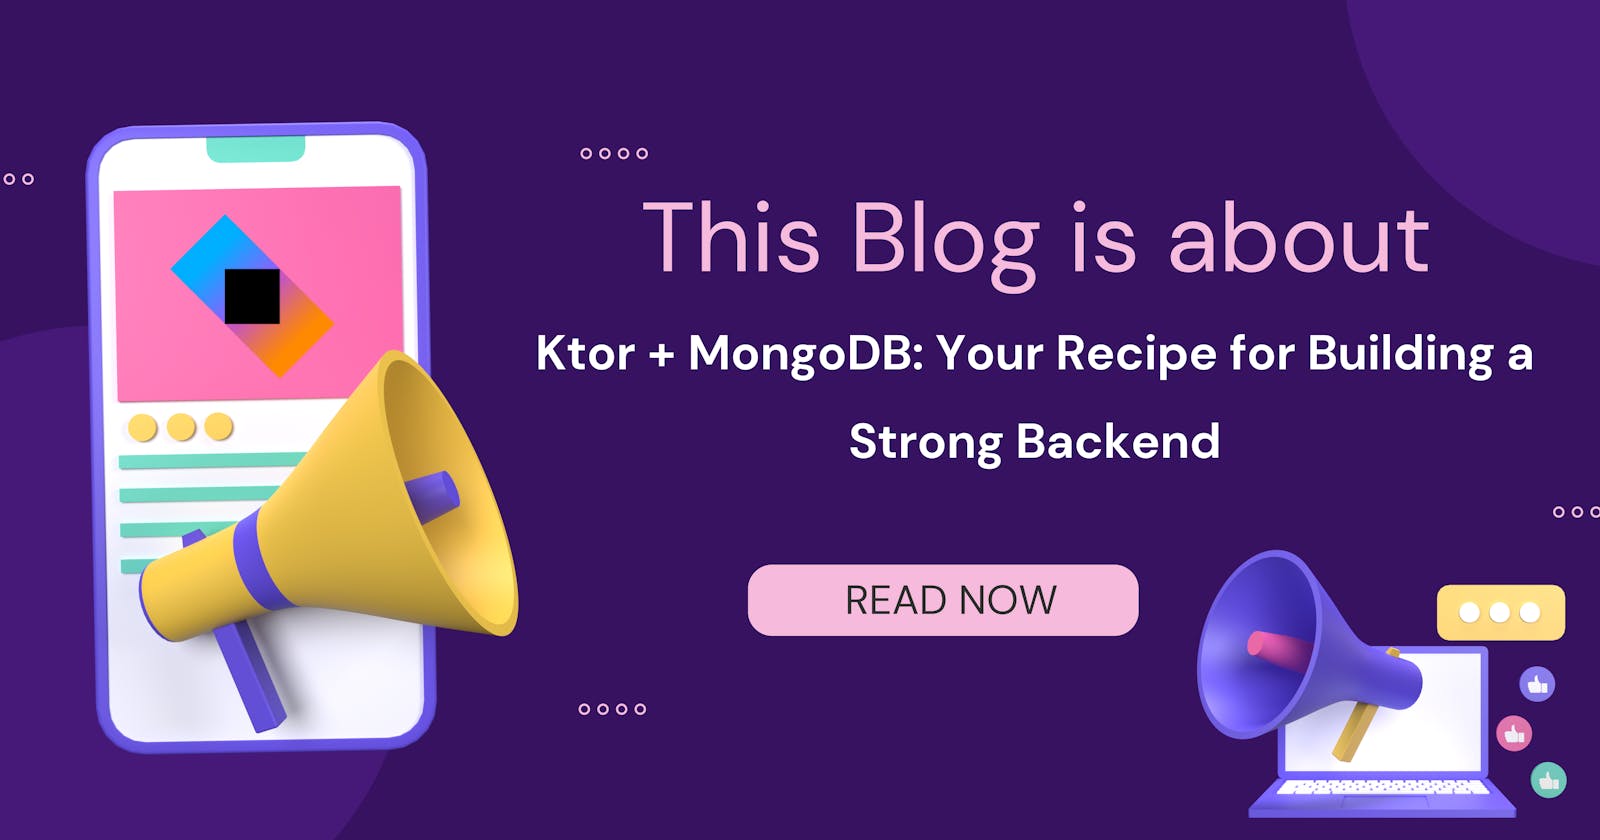 Ktor + MongoDB: Your Recipe for Building a Strong Backend